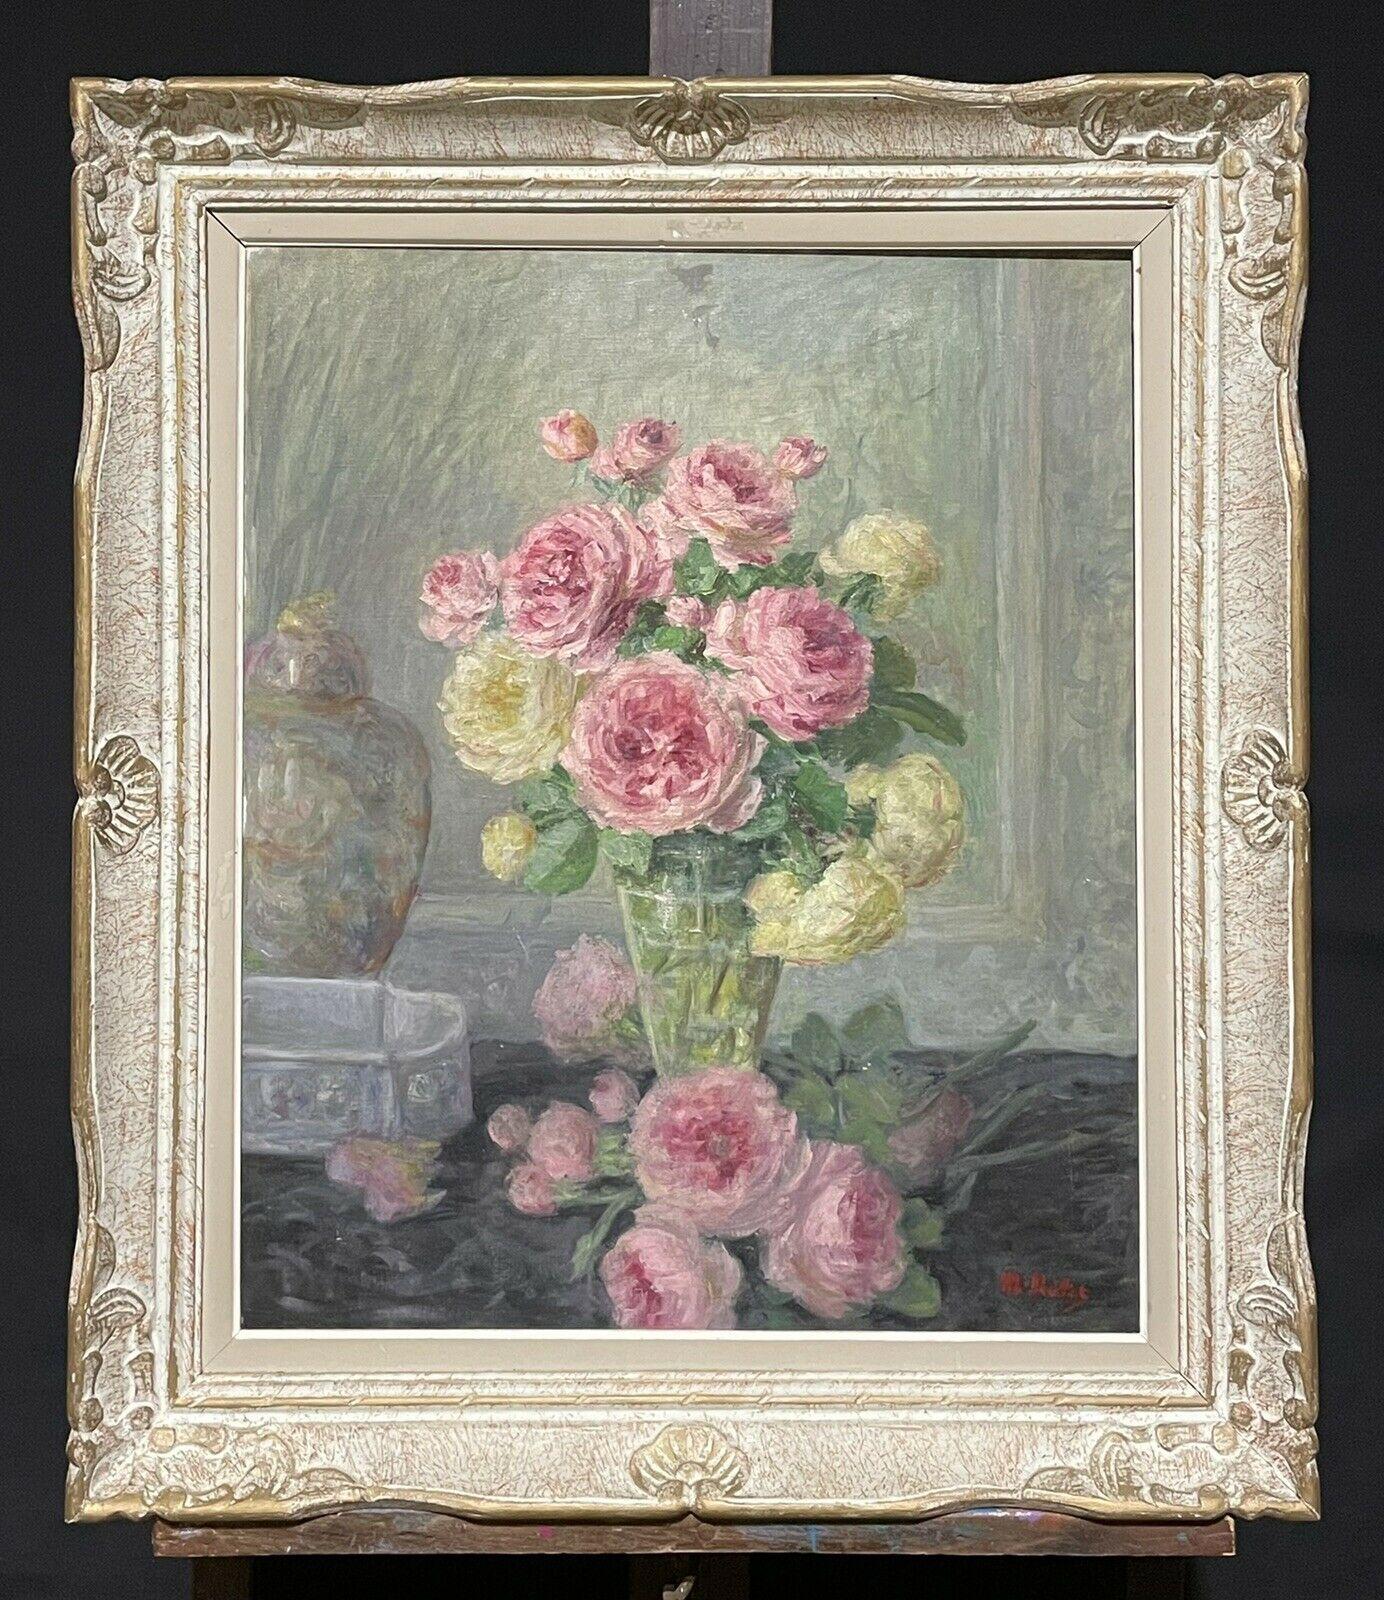 Artist/ School/ Date:
French School, early 20th century, signed

Title:
Still Life of flowers within an interior setting.

Medium & Size:
oil painting on canvas: 25.5 x 21.25 inches, frame: 32 x 27.5 inches

Condition:
the painting is very sound and